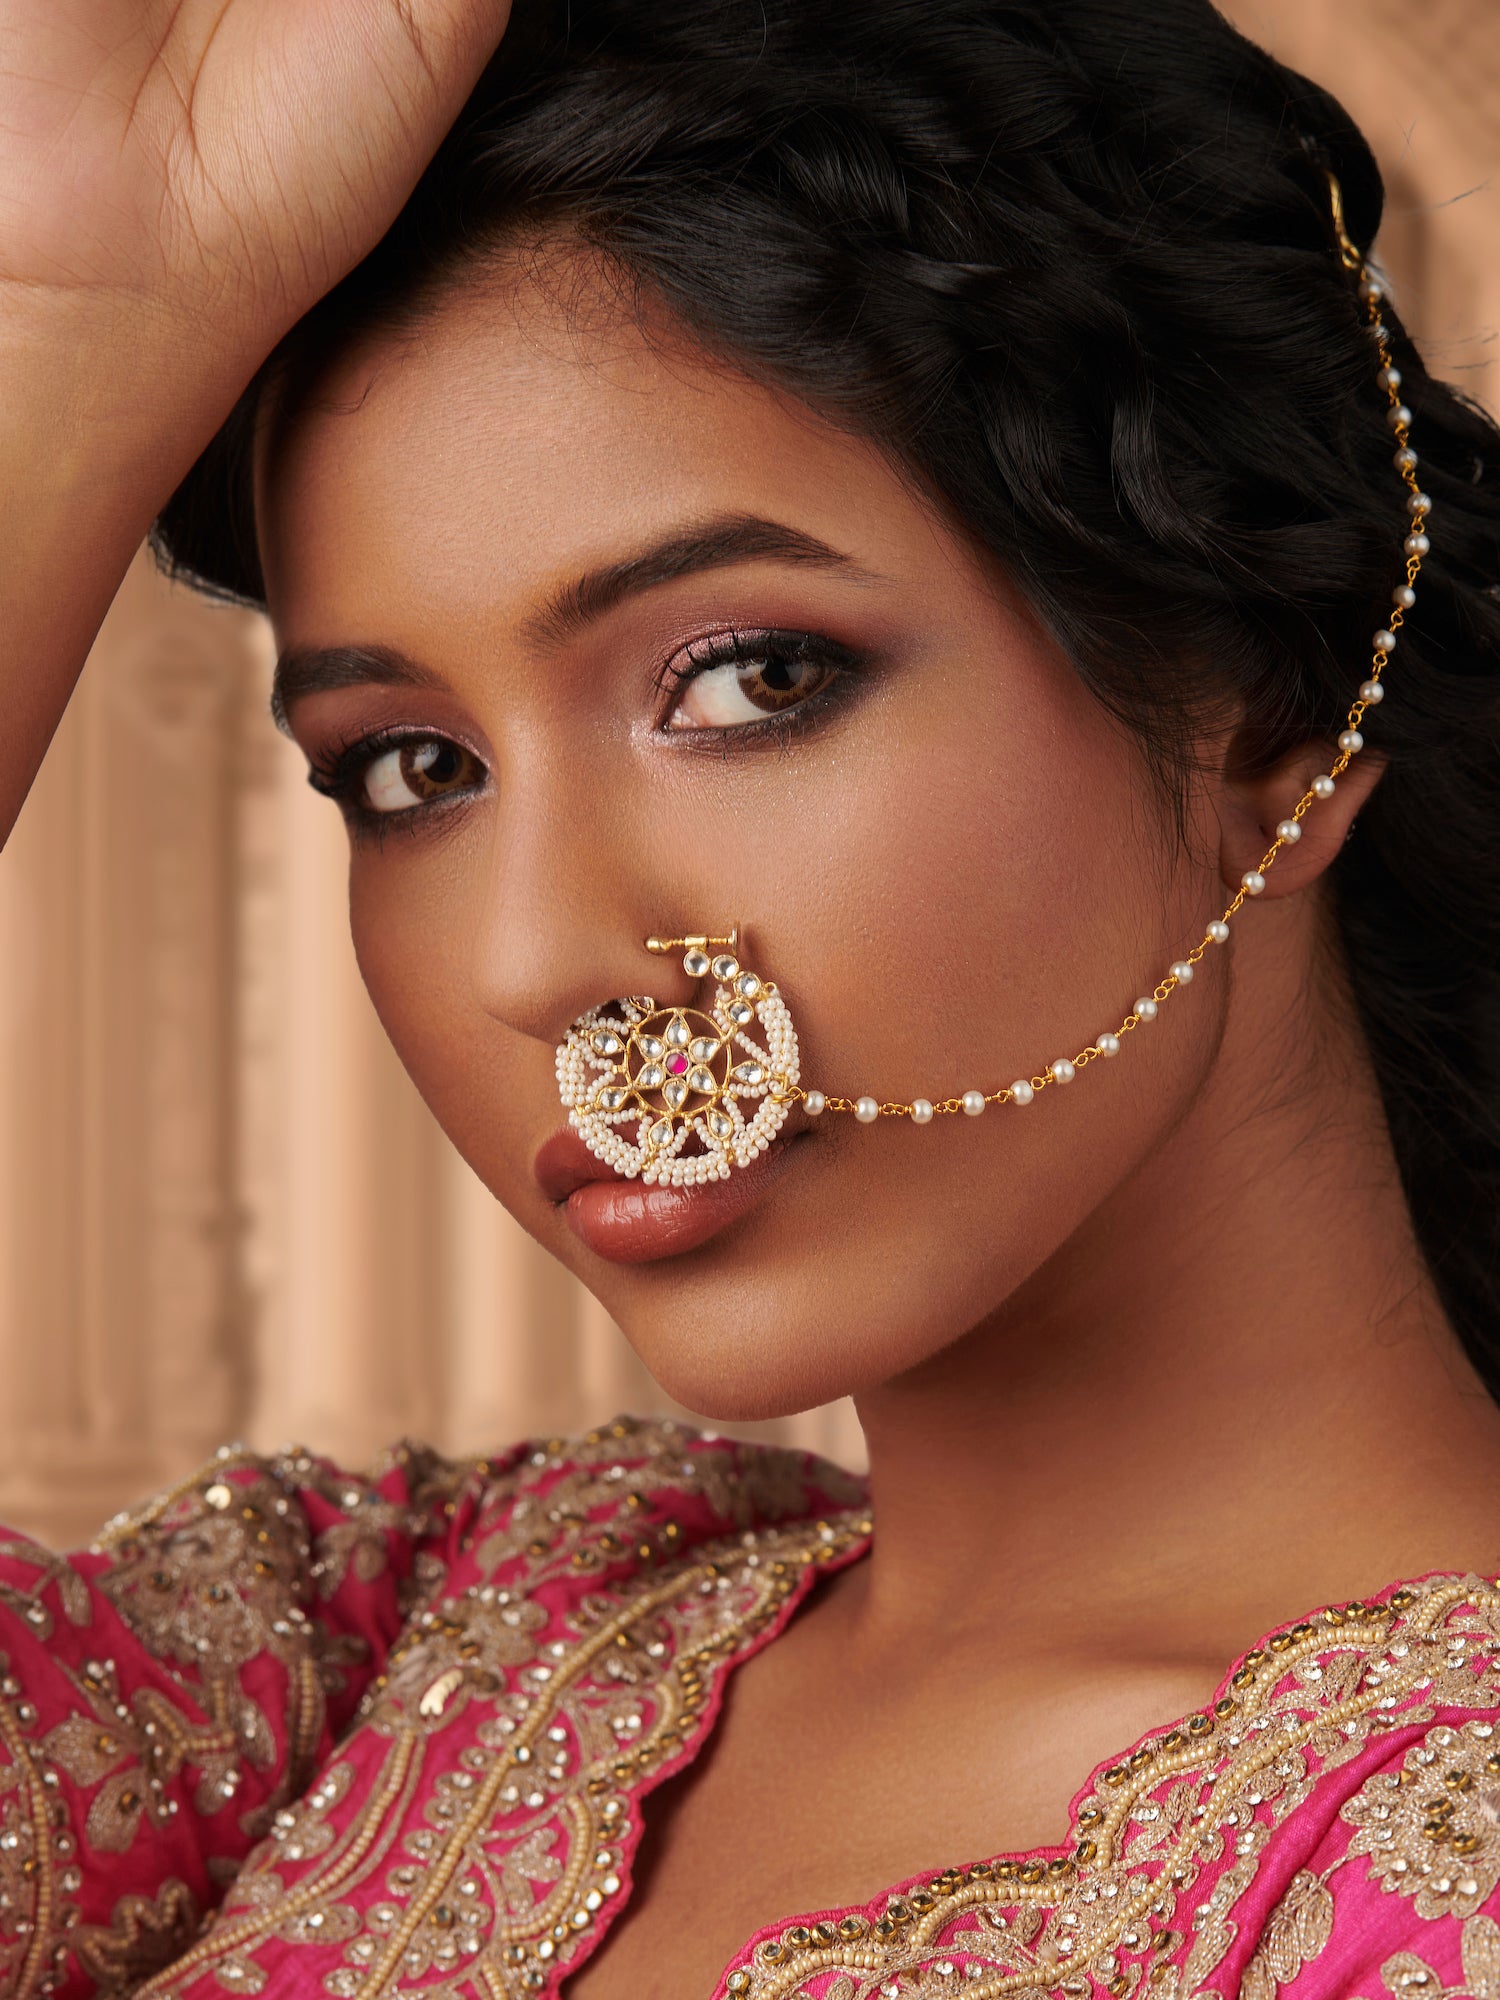 Stunning Wedding Nose Ring Designs for Your Big Day